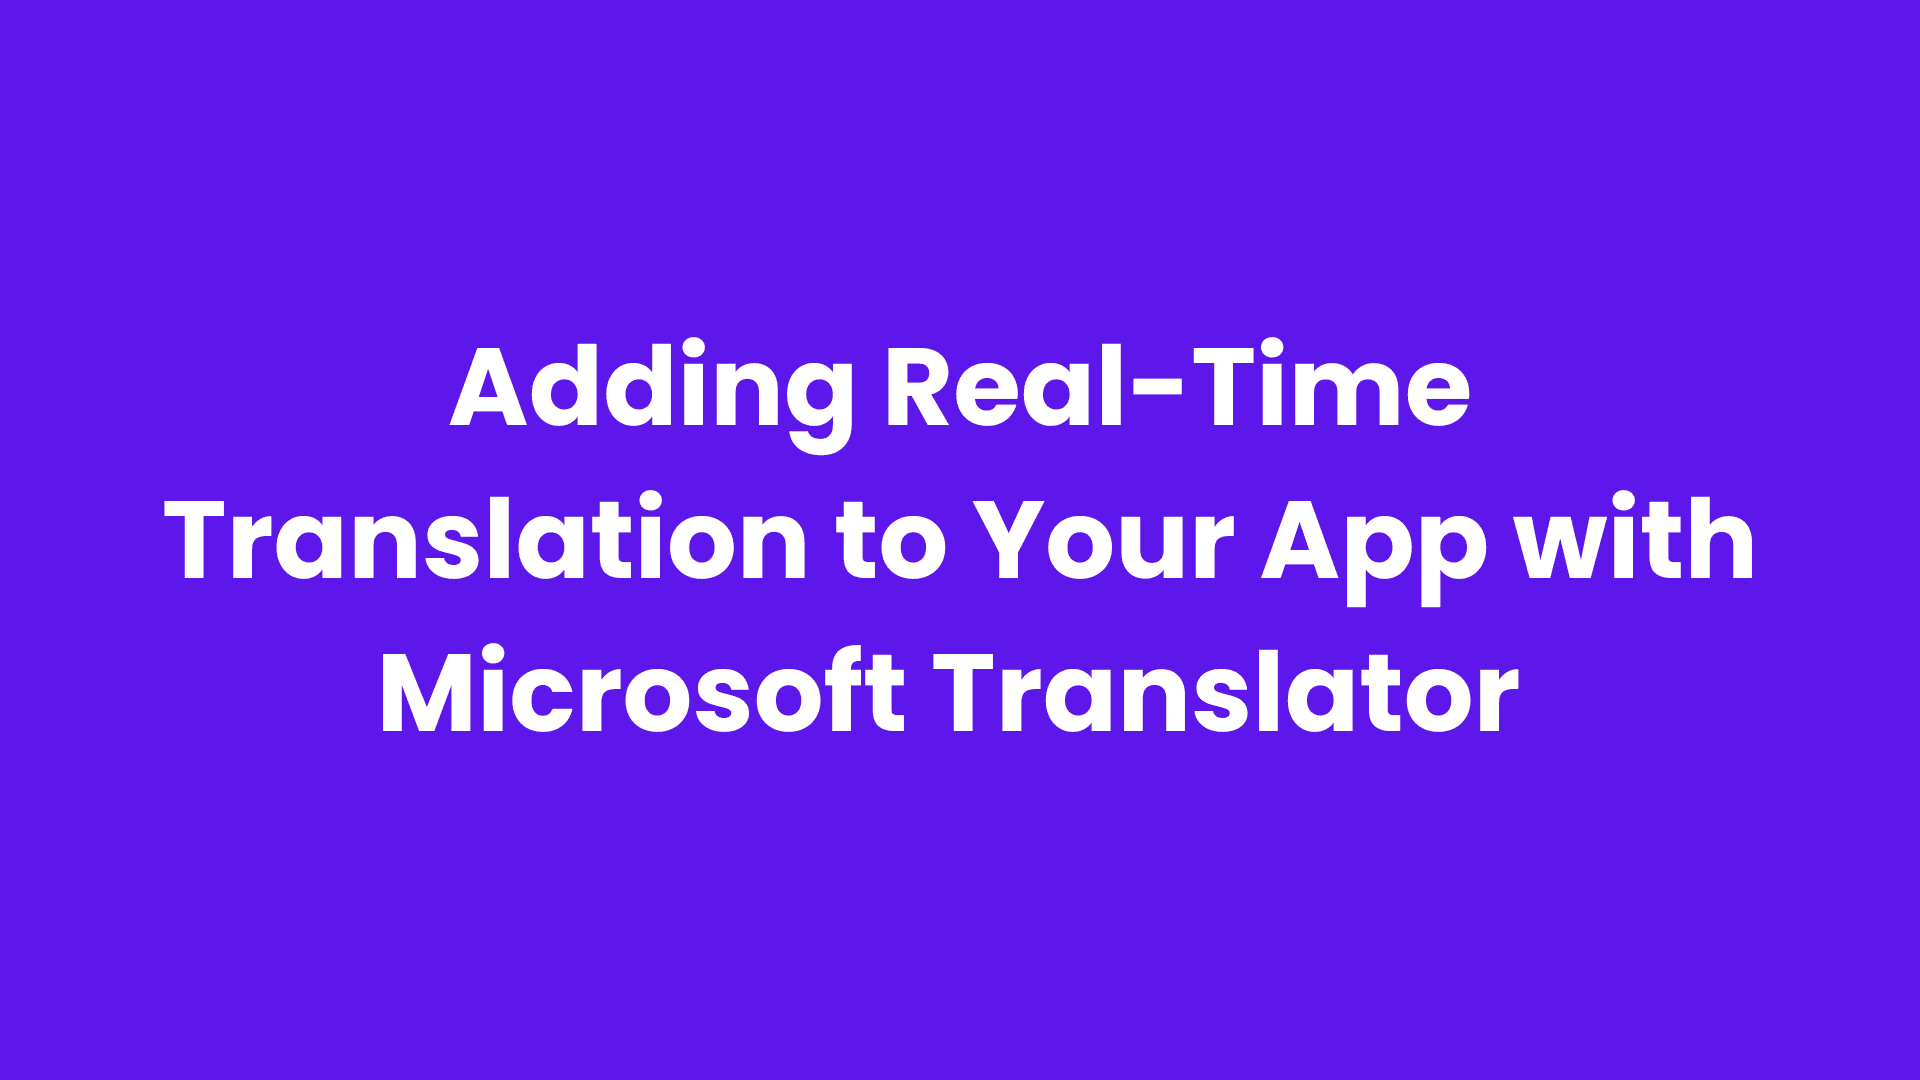 Adding Real-Time Translation to Your App with Microsoft Translator 